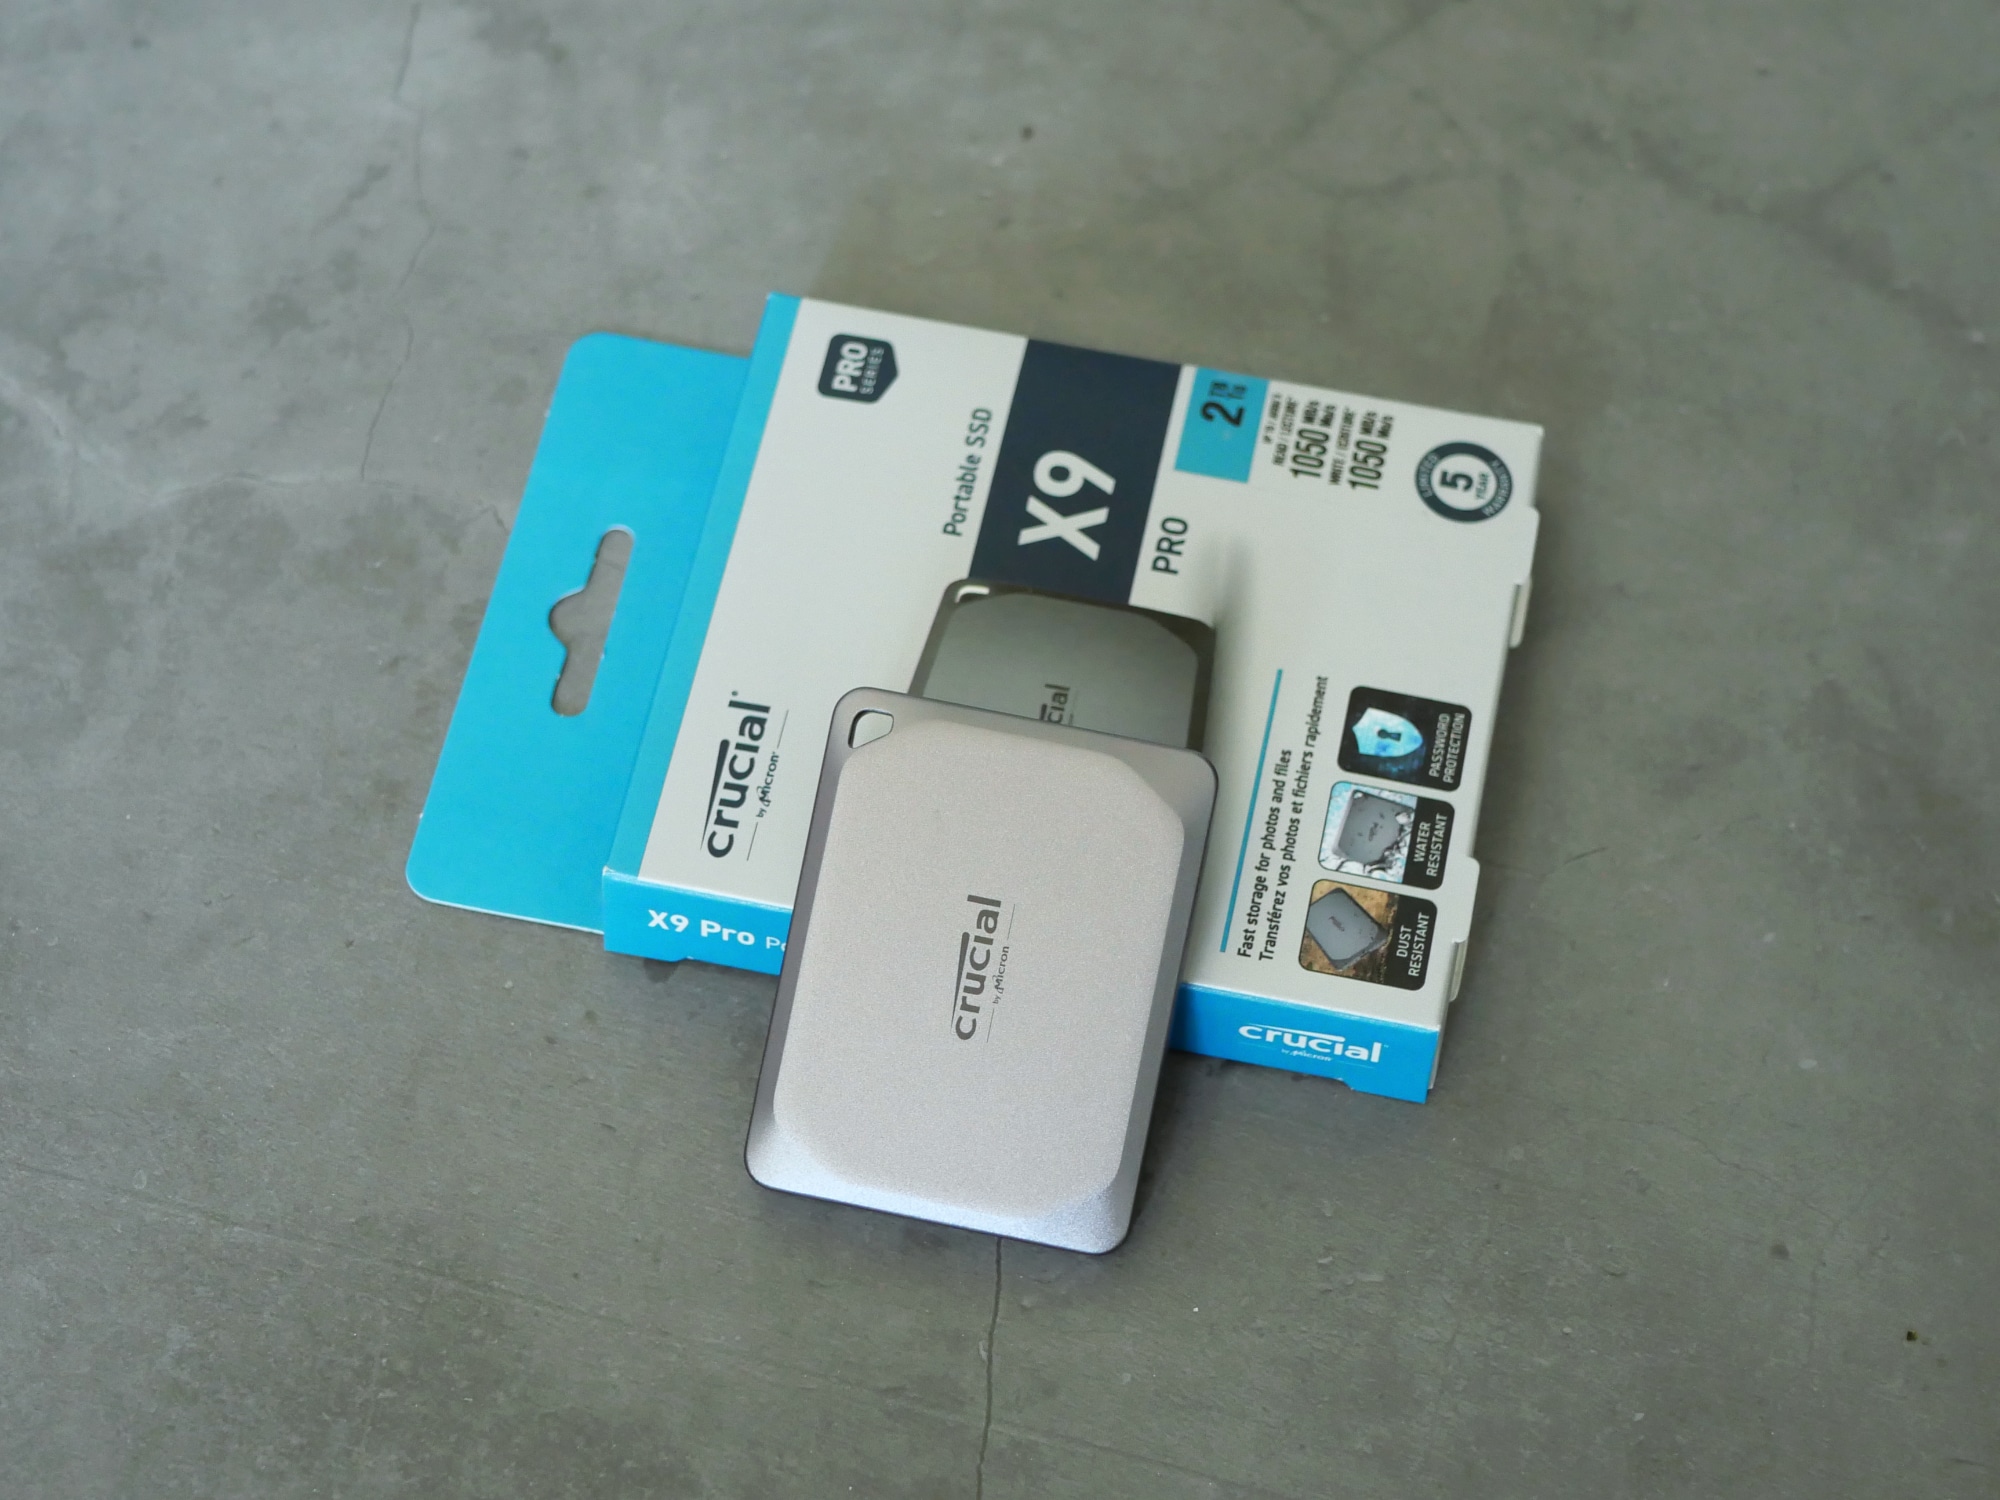 Crucial X9 Pro Review: A Fine Portable SSD